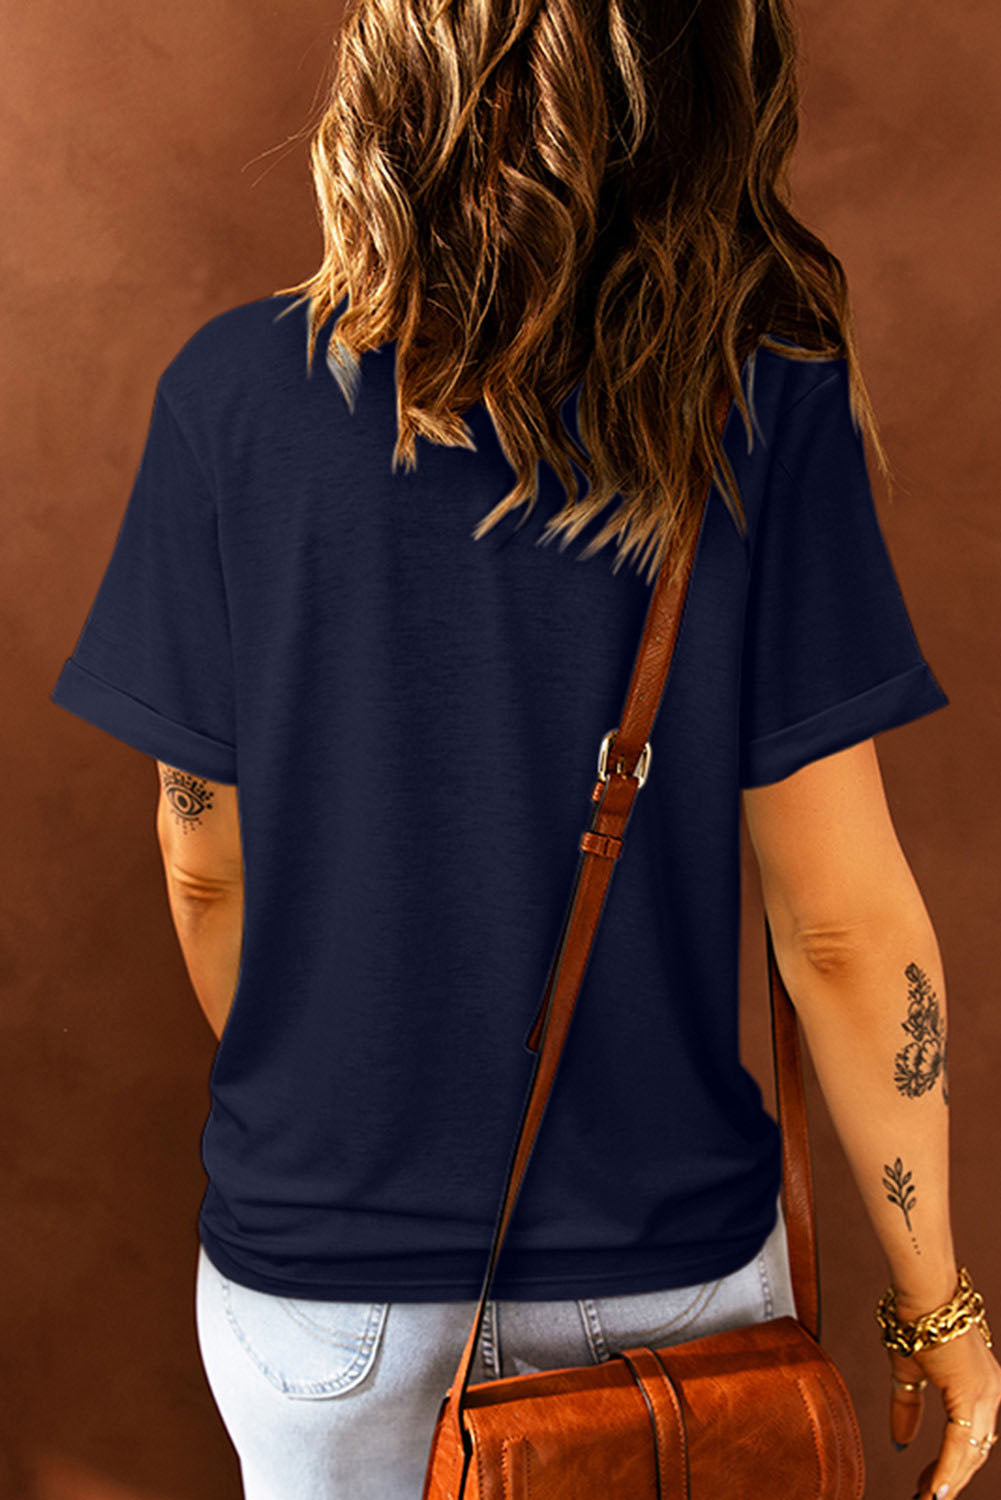 AMERICAN WOMAN Graphic Round Neck Tee